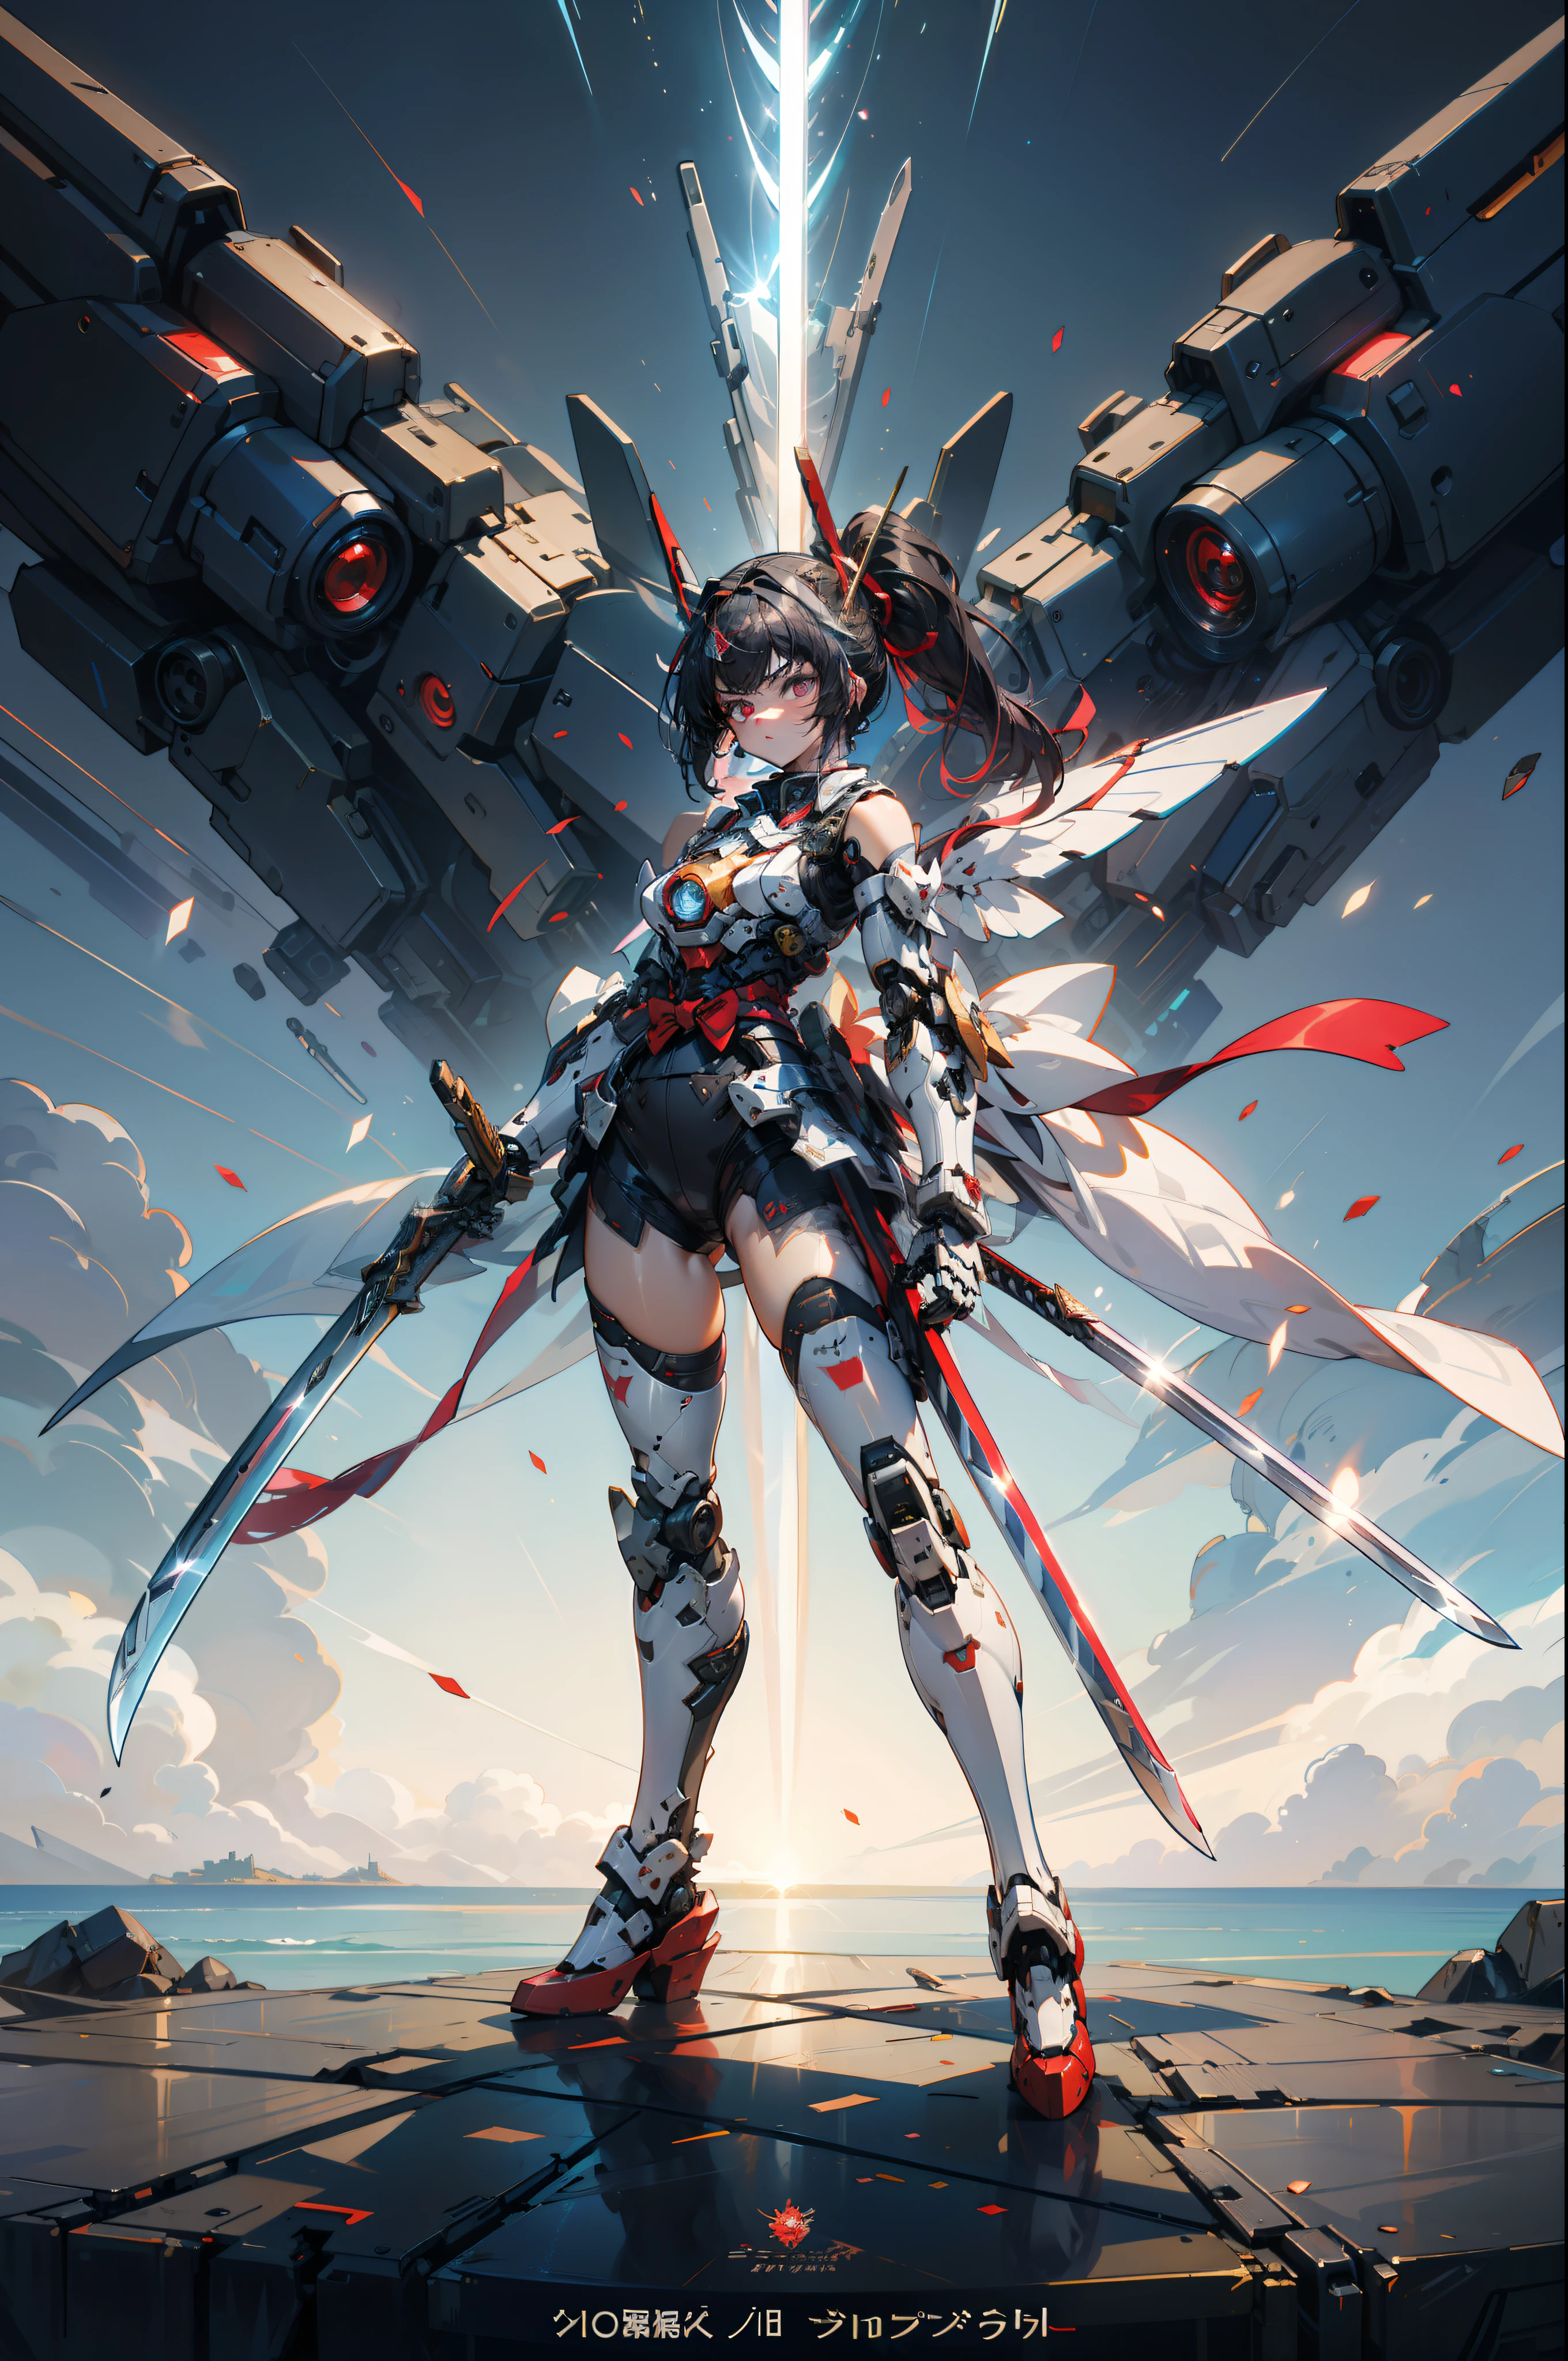 hyper quality, hyper detailed,perfect drawing,Solo, Beautiful Girl, master piece, (mecha musume), mechanical armor, headgear, mechanical wings, holding huge gunSamurai wielding a sword, Black Ponytail, Hair tied up with a large red ribbon, Equipped with two Japan swords ((extra huge oversize cool samurai_sword in hands, extra huge cool weapon machine)), open stance, action pose,purgatory,